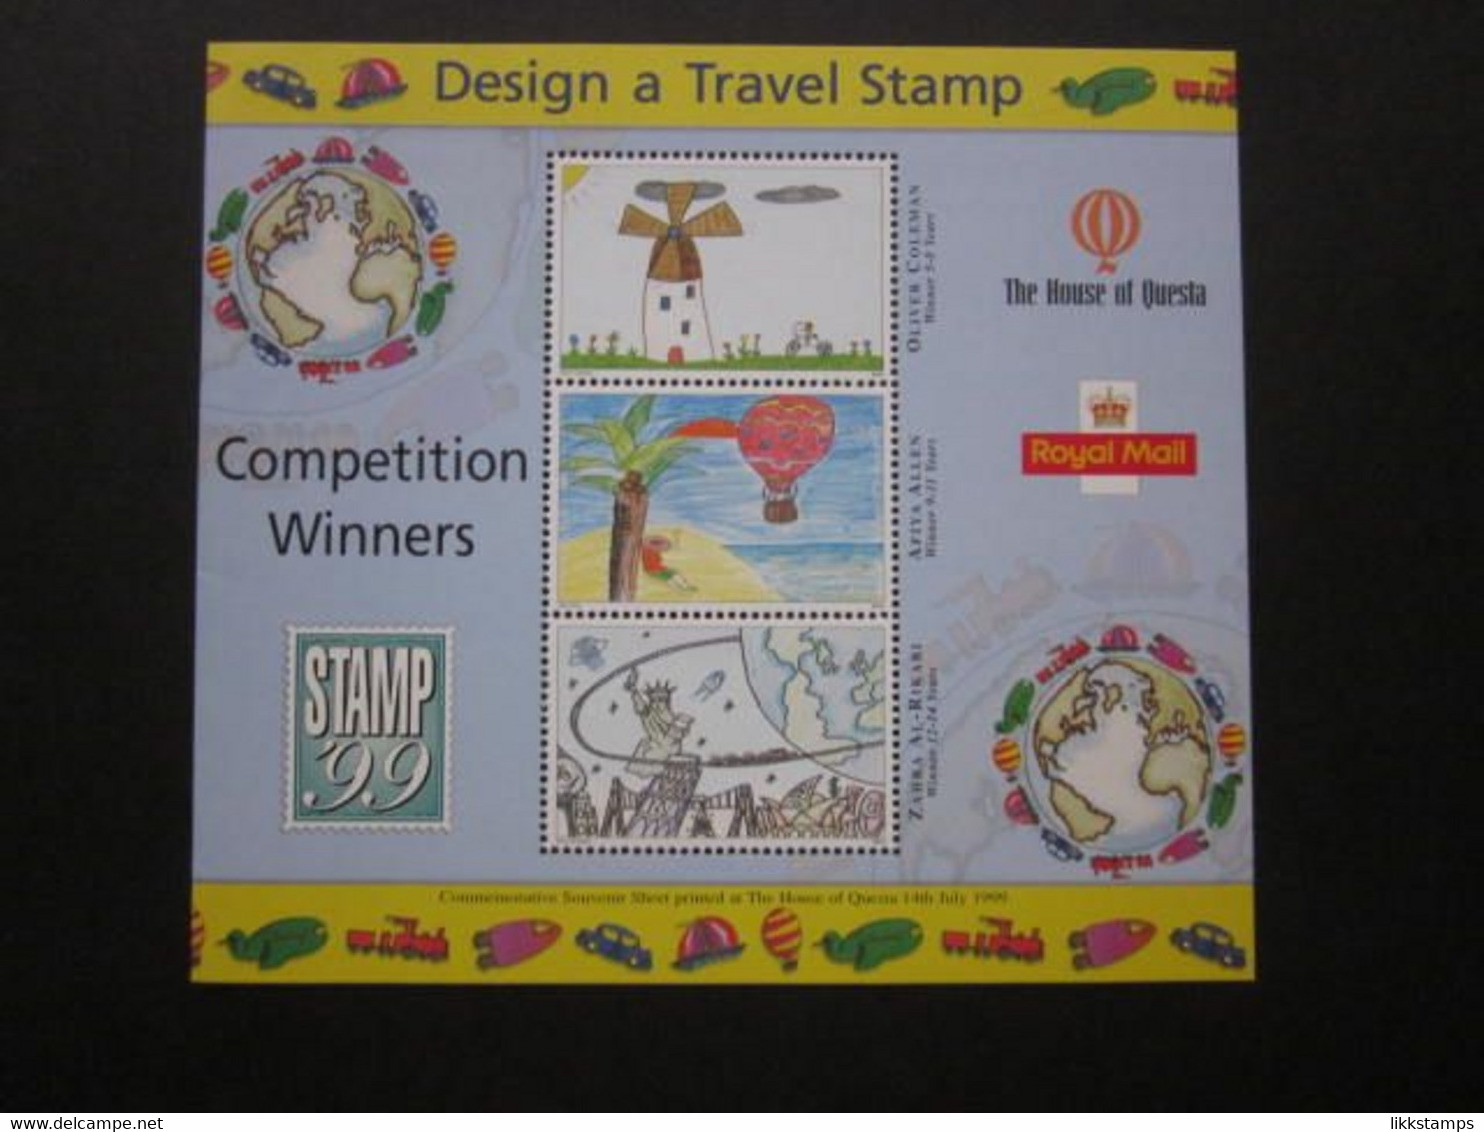 1999 THE ROYAL MAIL/THE HOUSE OF QUESTA DESIGN A TRAVEL STAMP COMPETITION SOUVENIR SHEET. ( 02095 ) - Cinderella